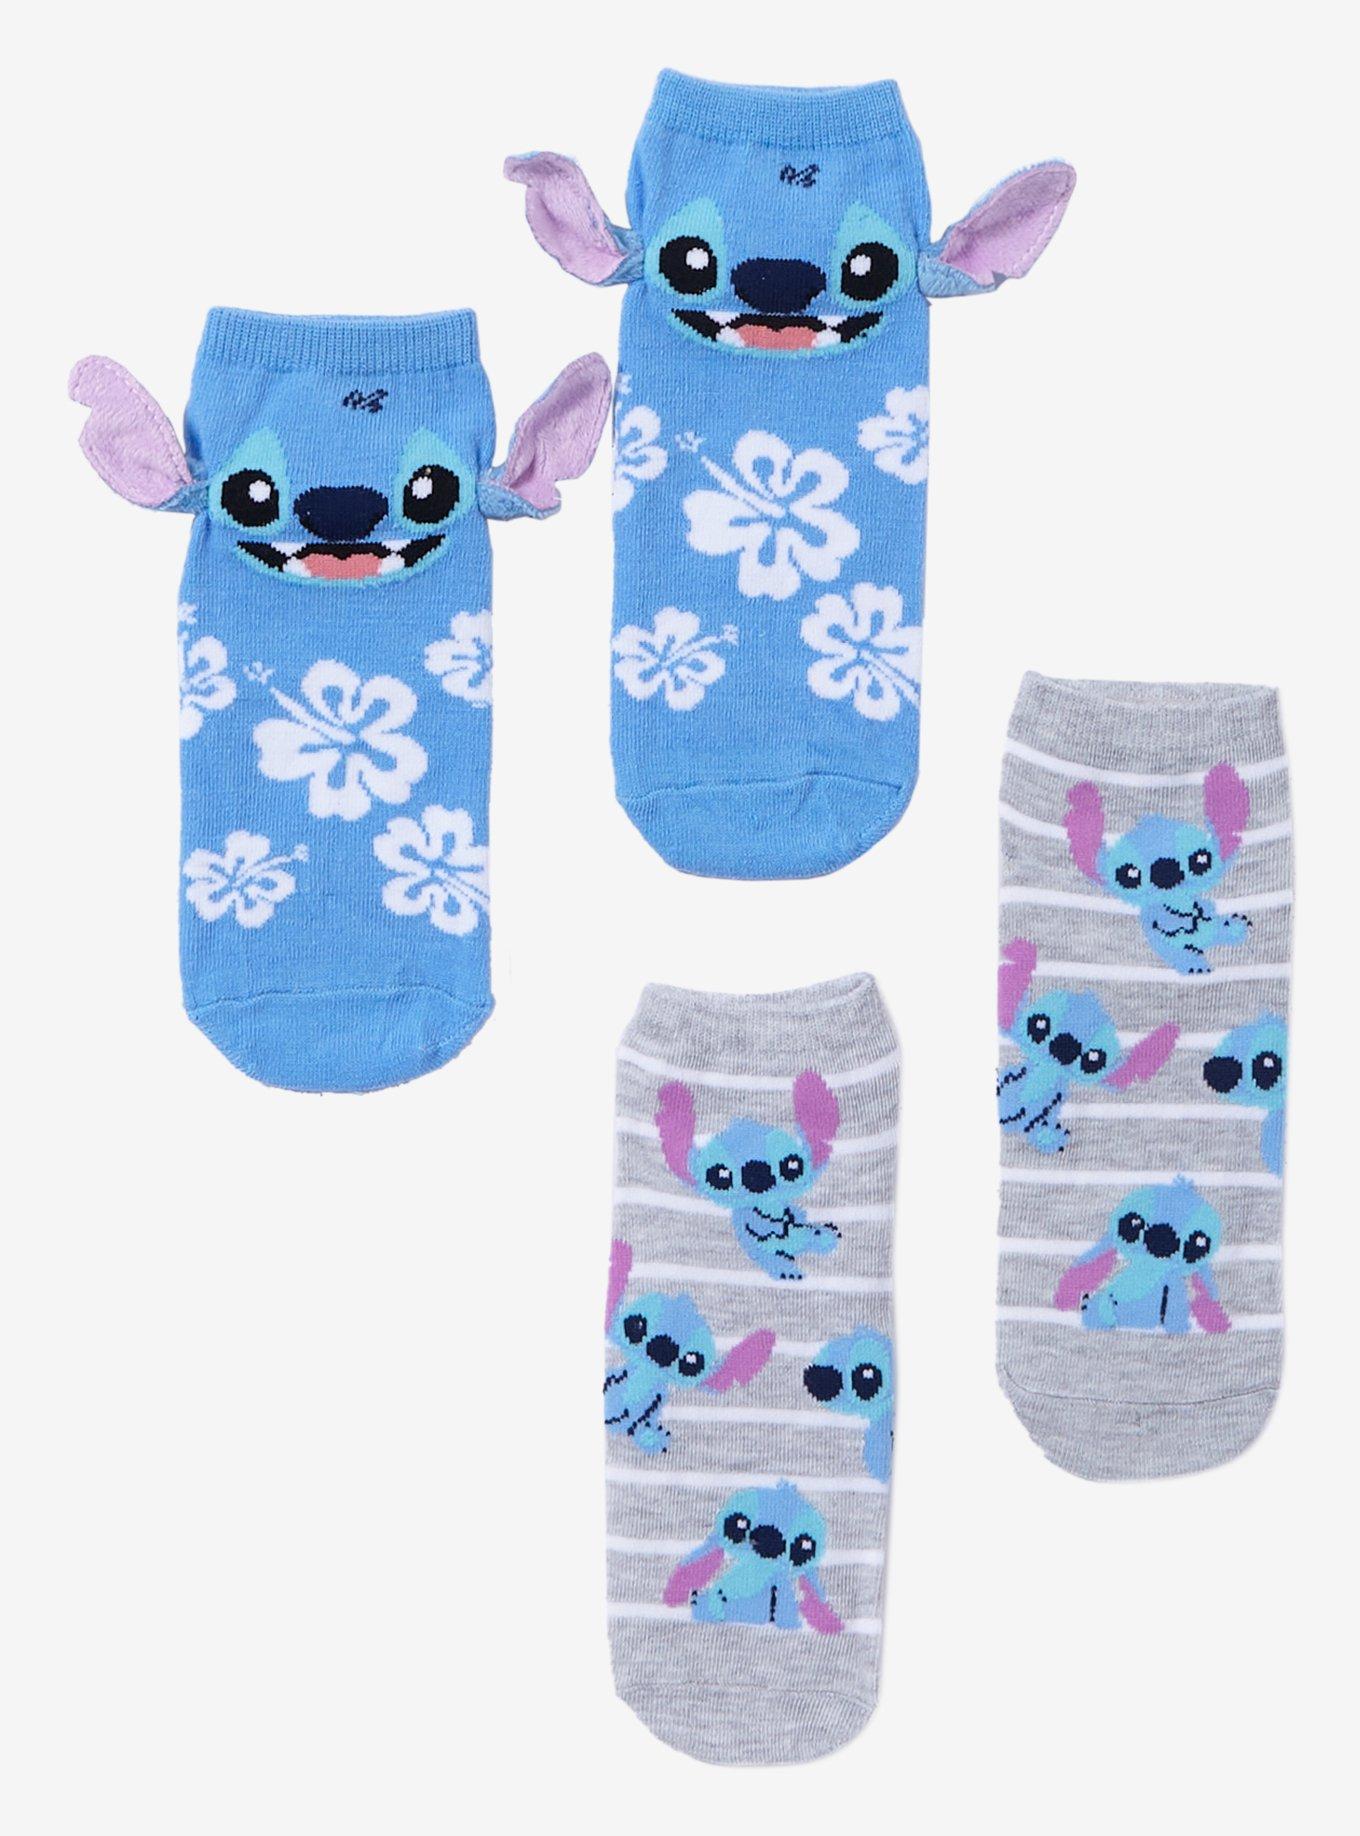 DISNEY LILO & STITCH Ladies 5 Pair No Show Socks 'HERE FOR THE MUSIC